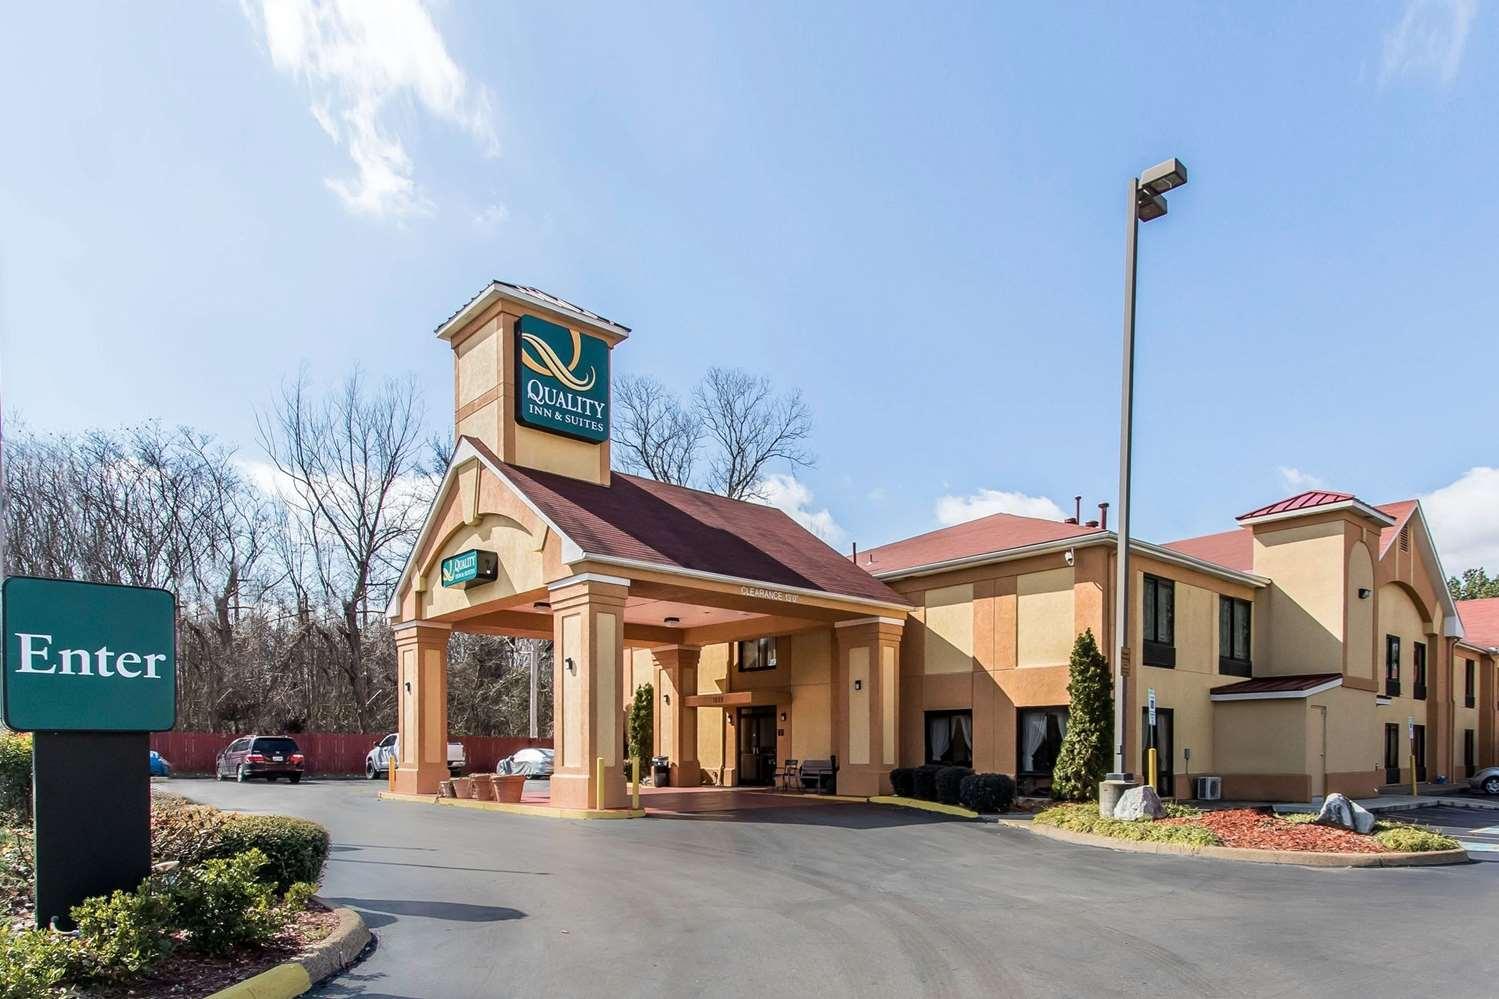 Quality Inn and Suites Memphis East in Memphis, TN